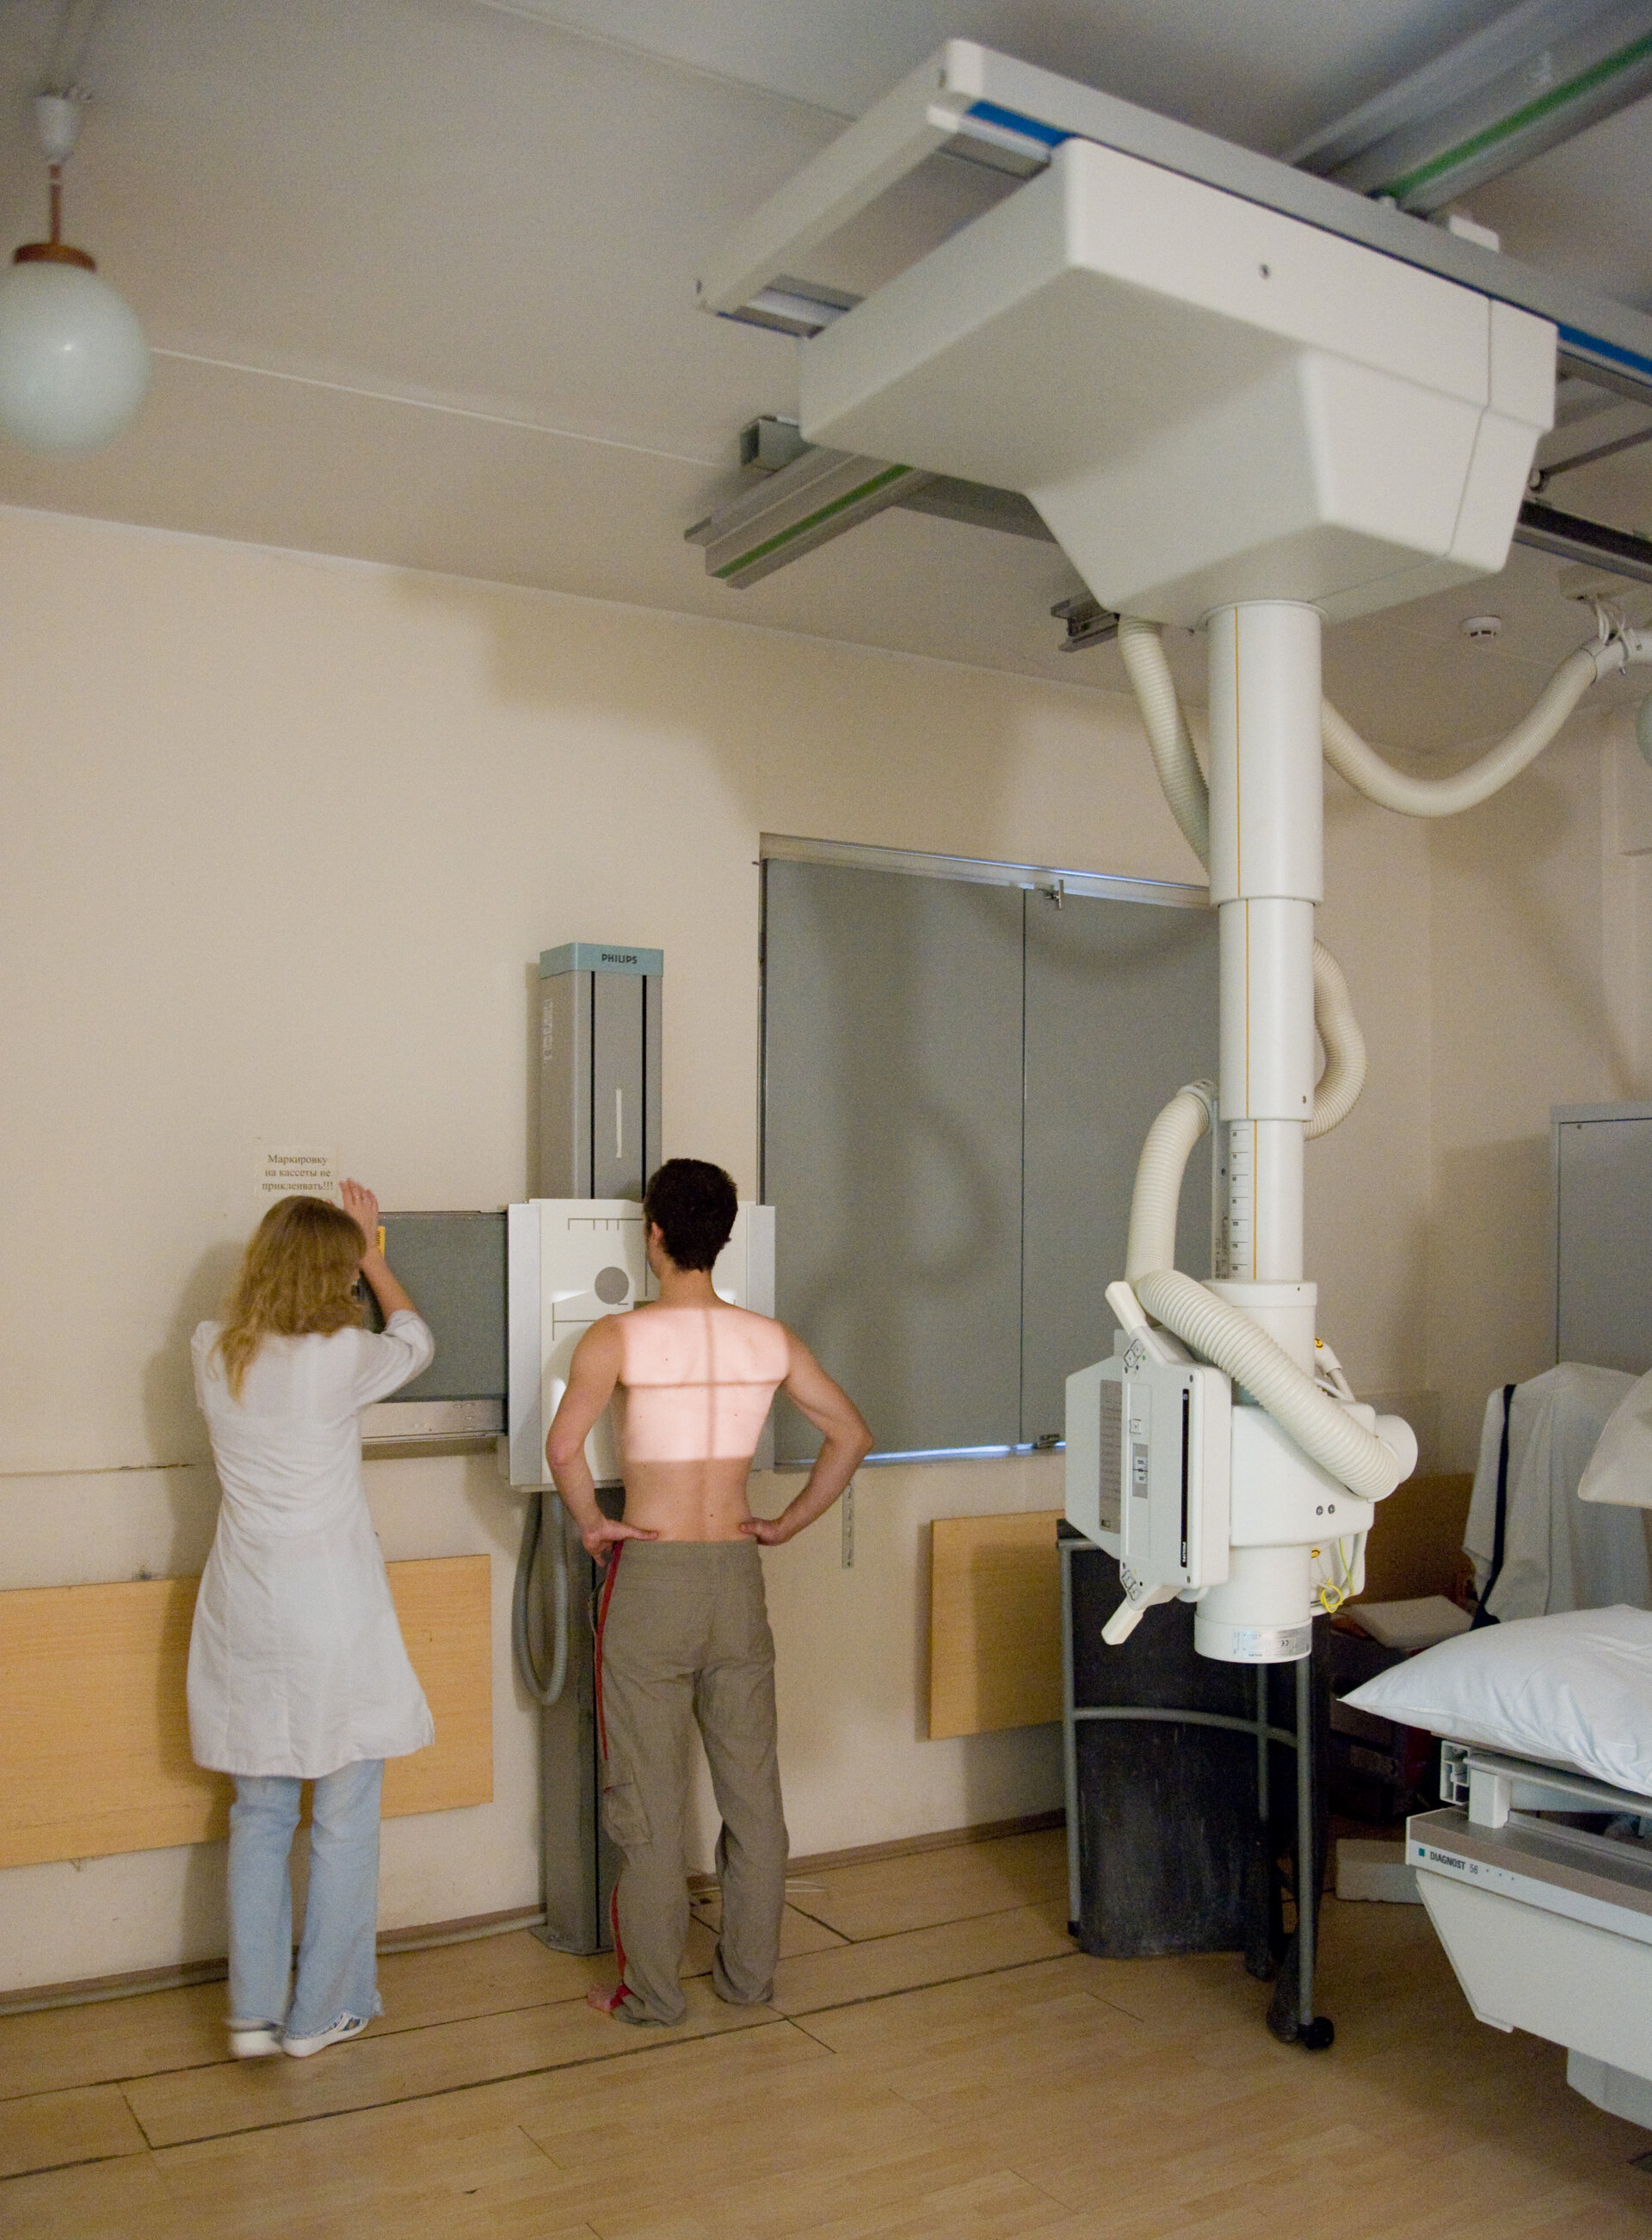 Medical examinations included X-ray of chest and spine